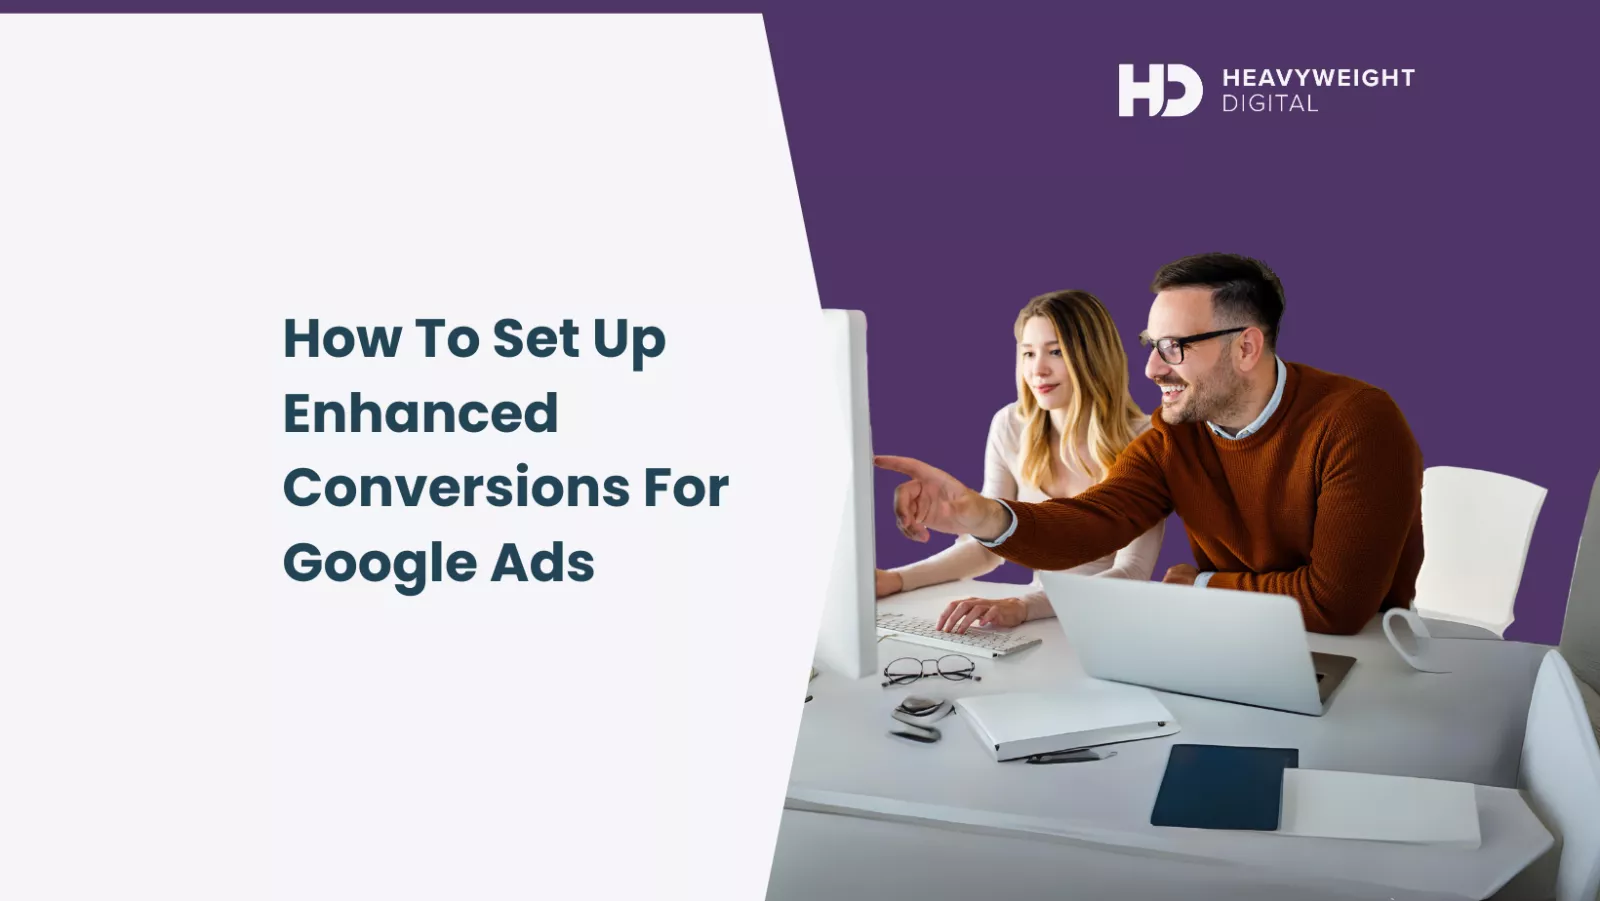 How To Set Up Enhanced Conversions for Google Ads